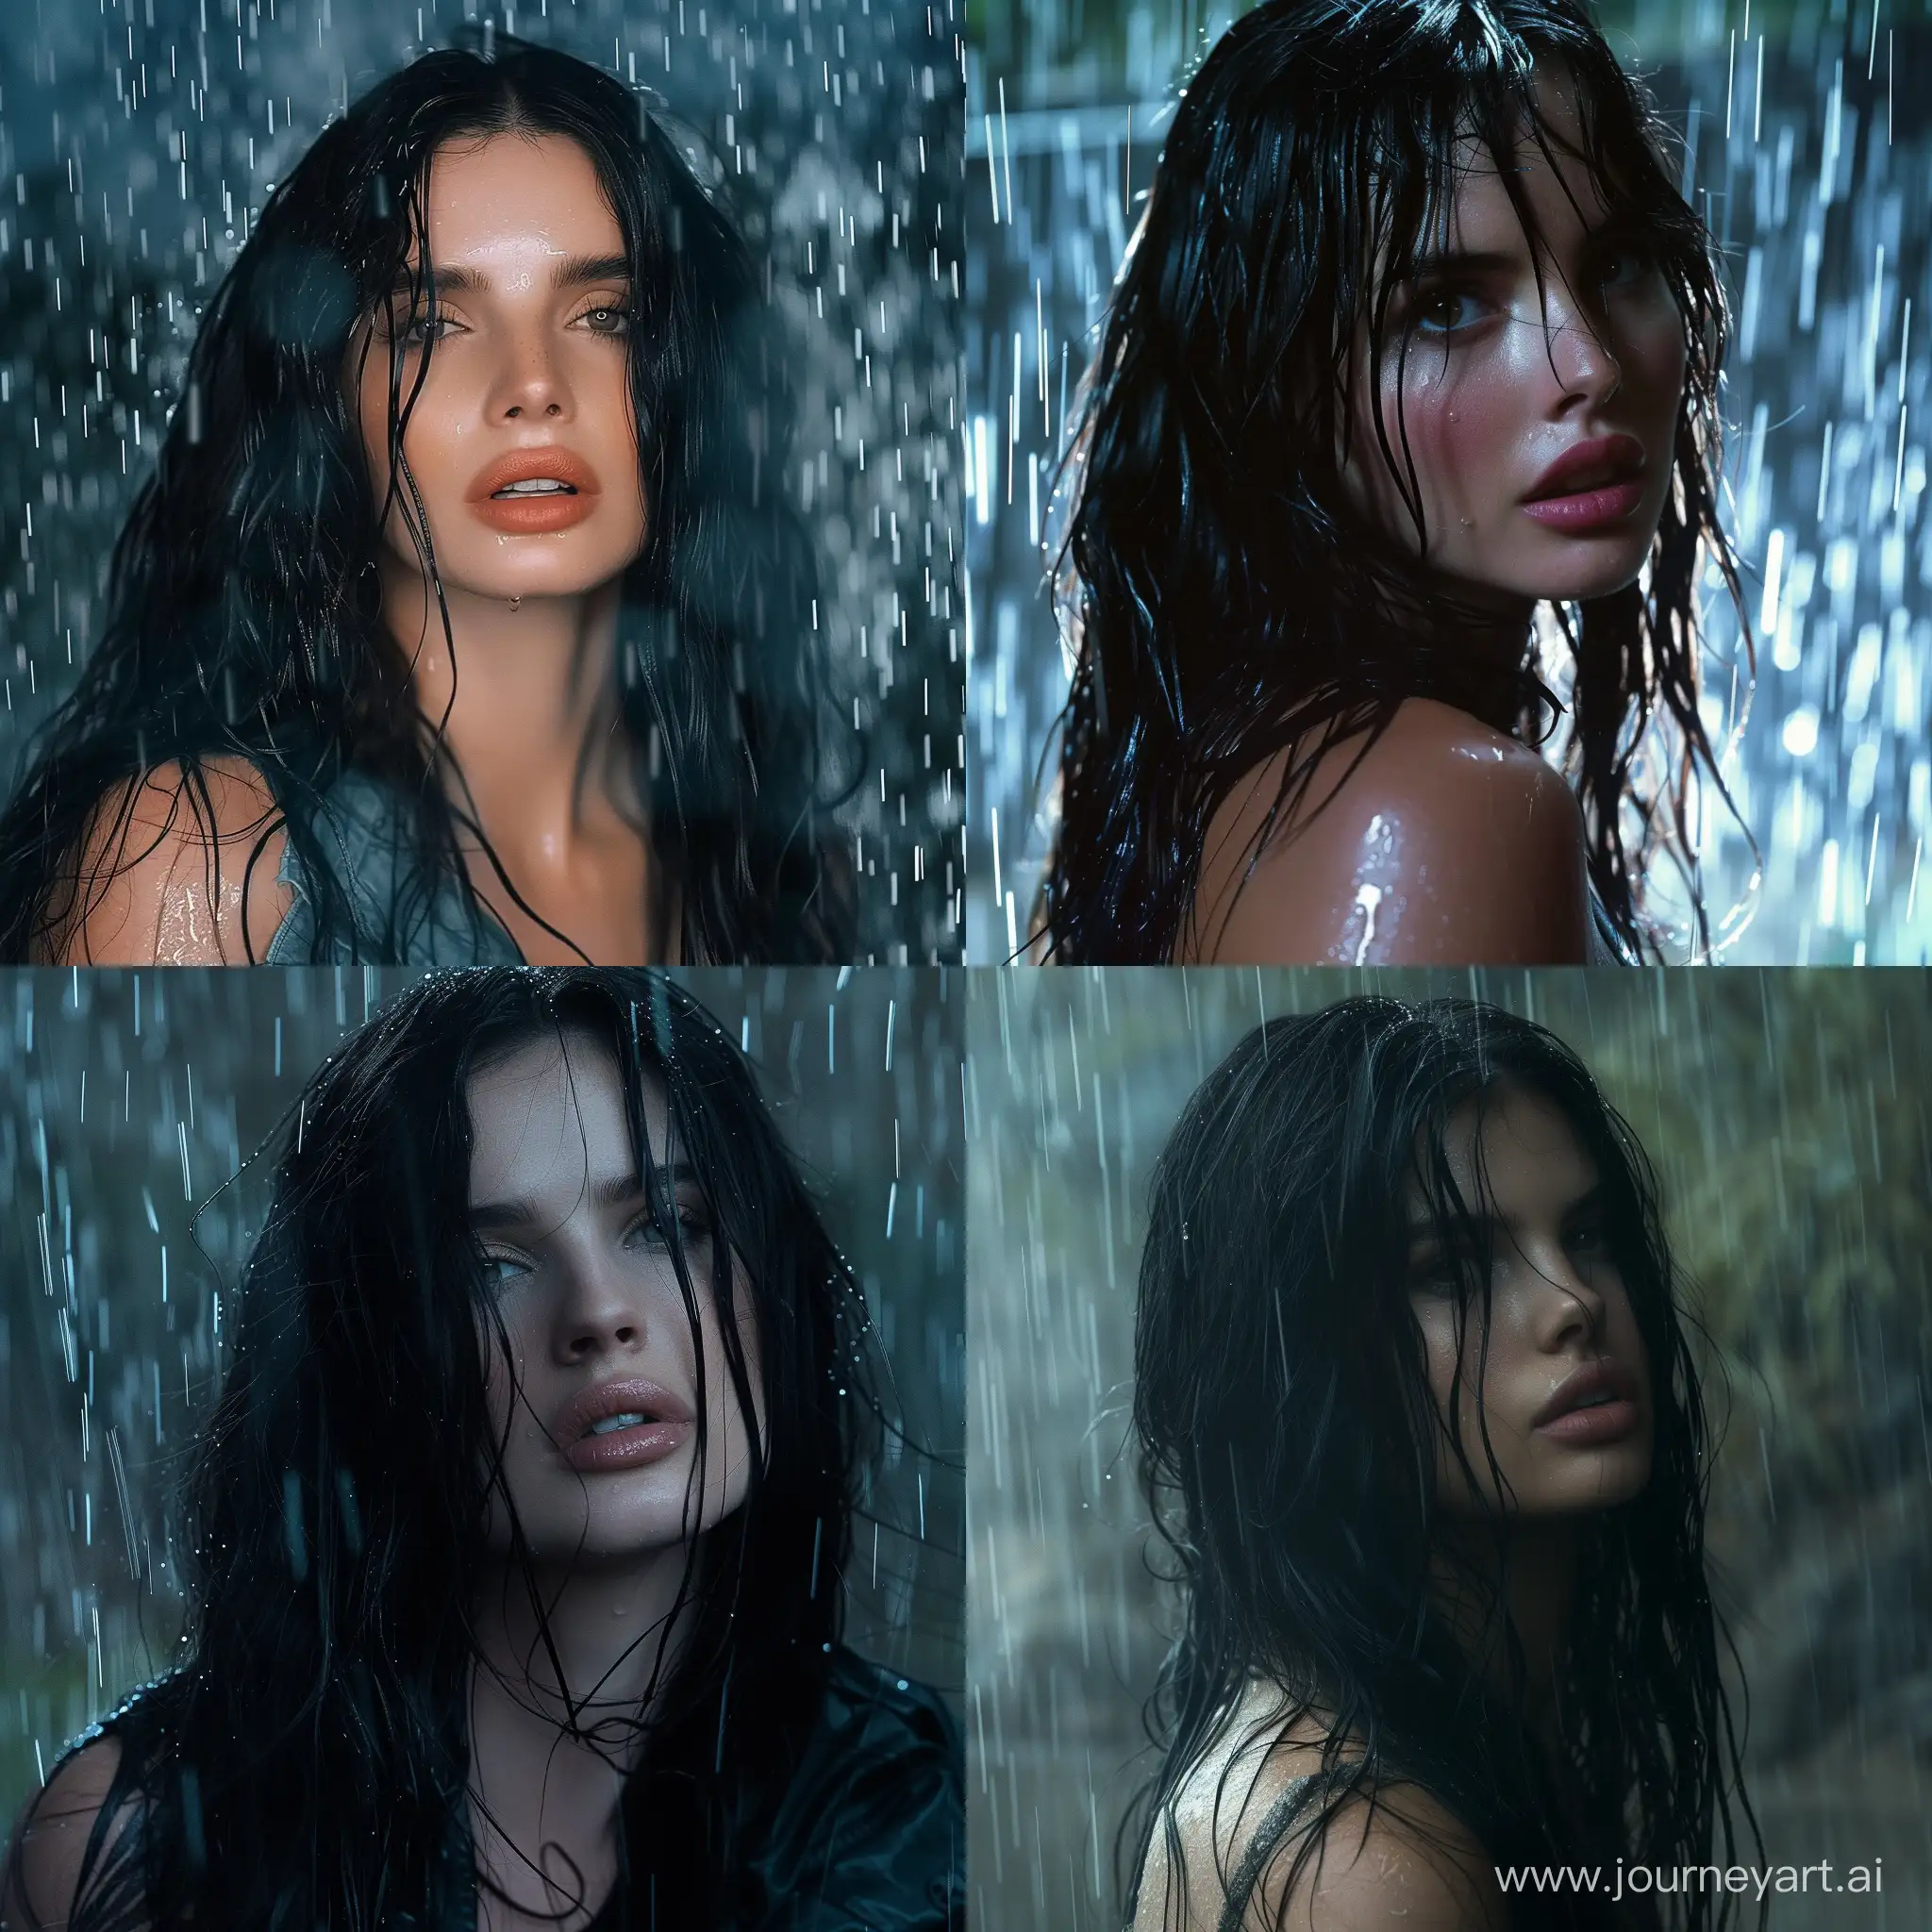 Bella-Thorne-Embracing-Rain-with-Long-Black-Hair-Ethereal-Beauty-in-Nature